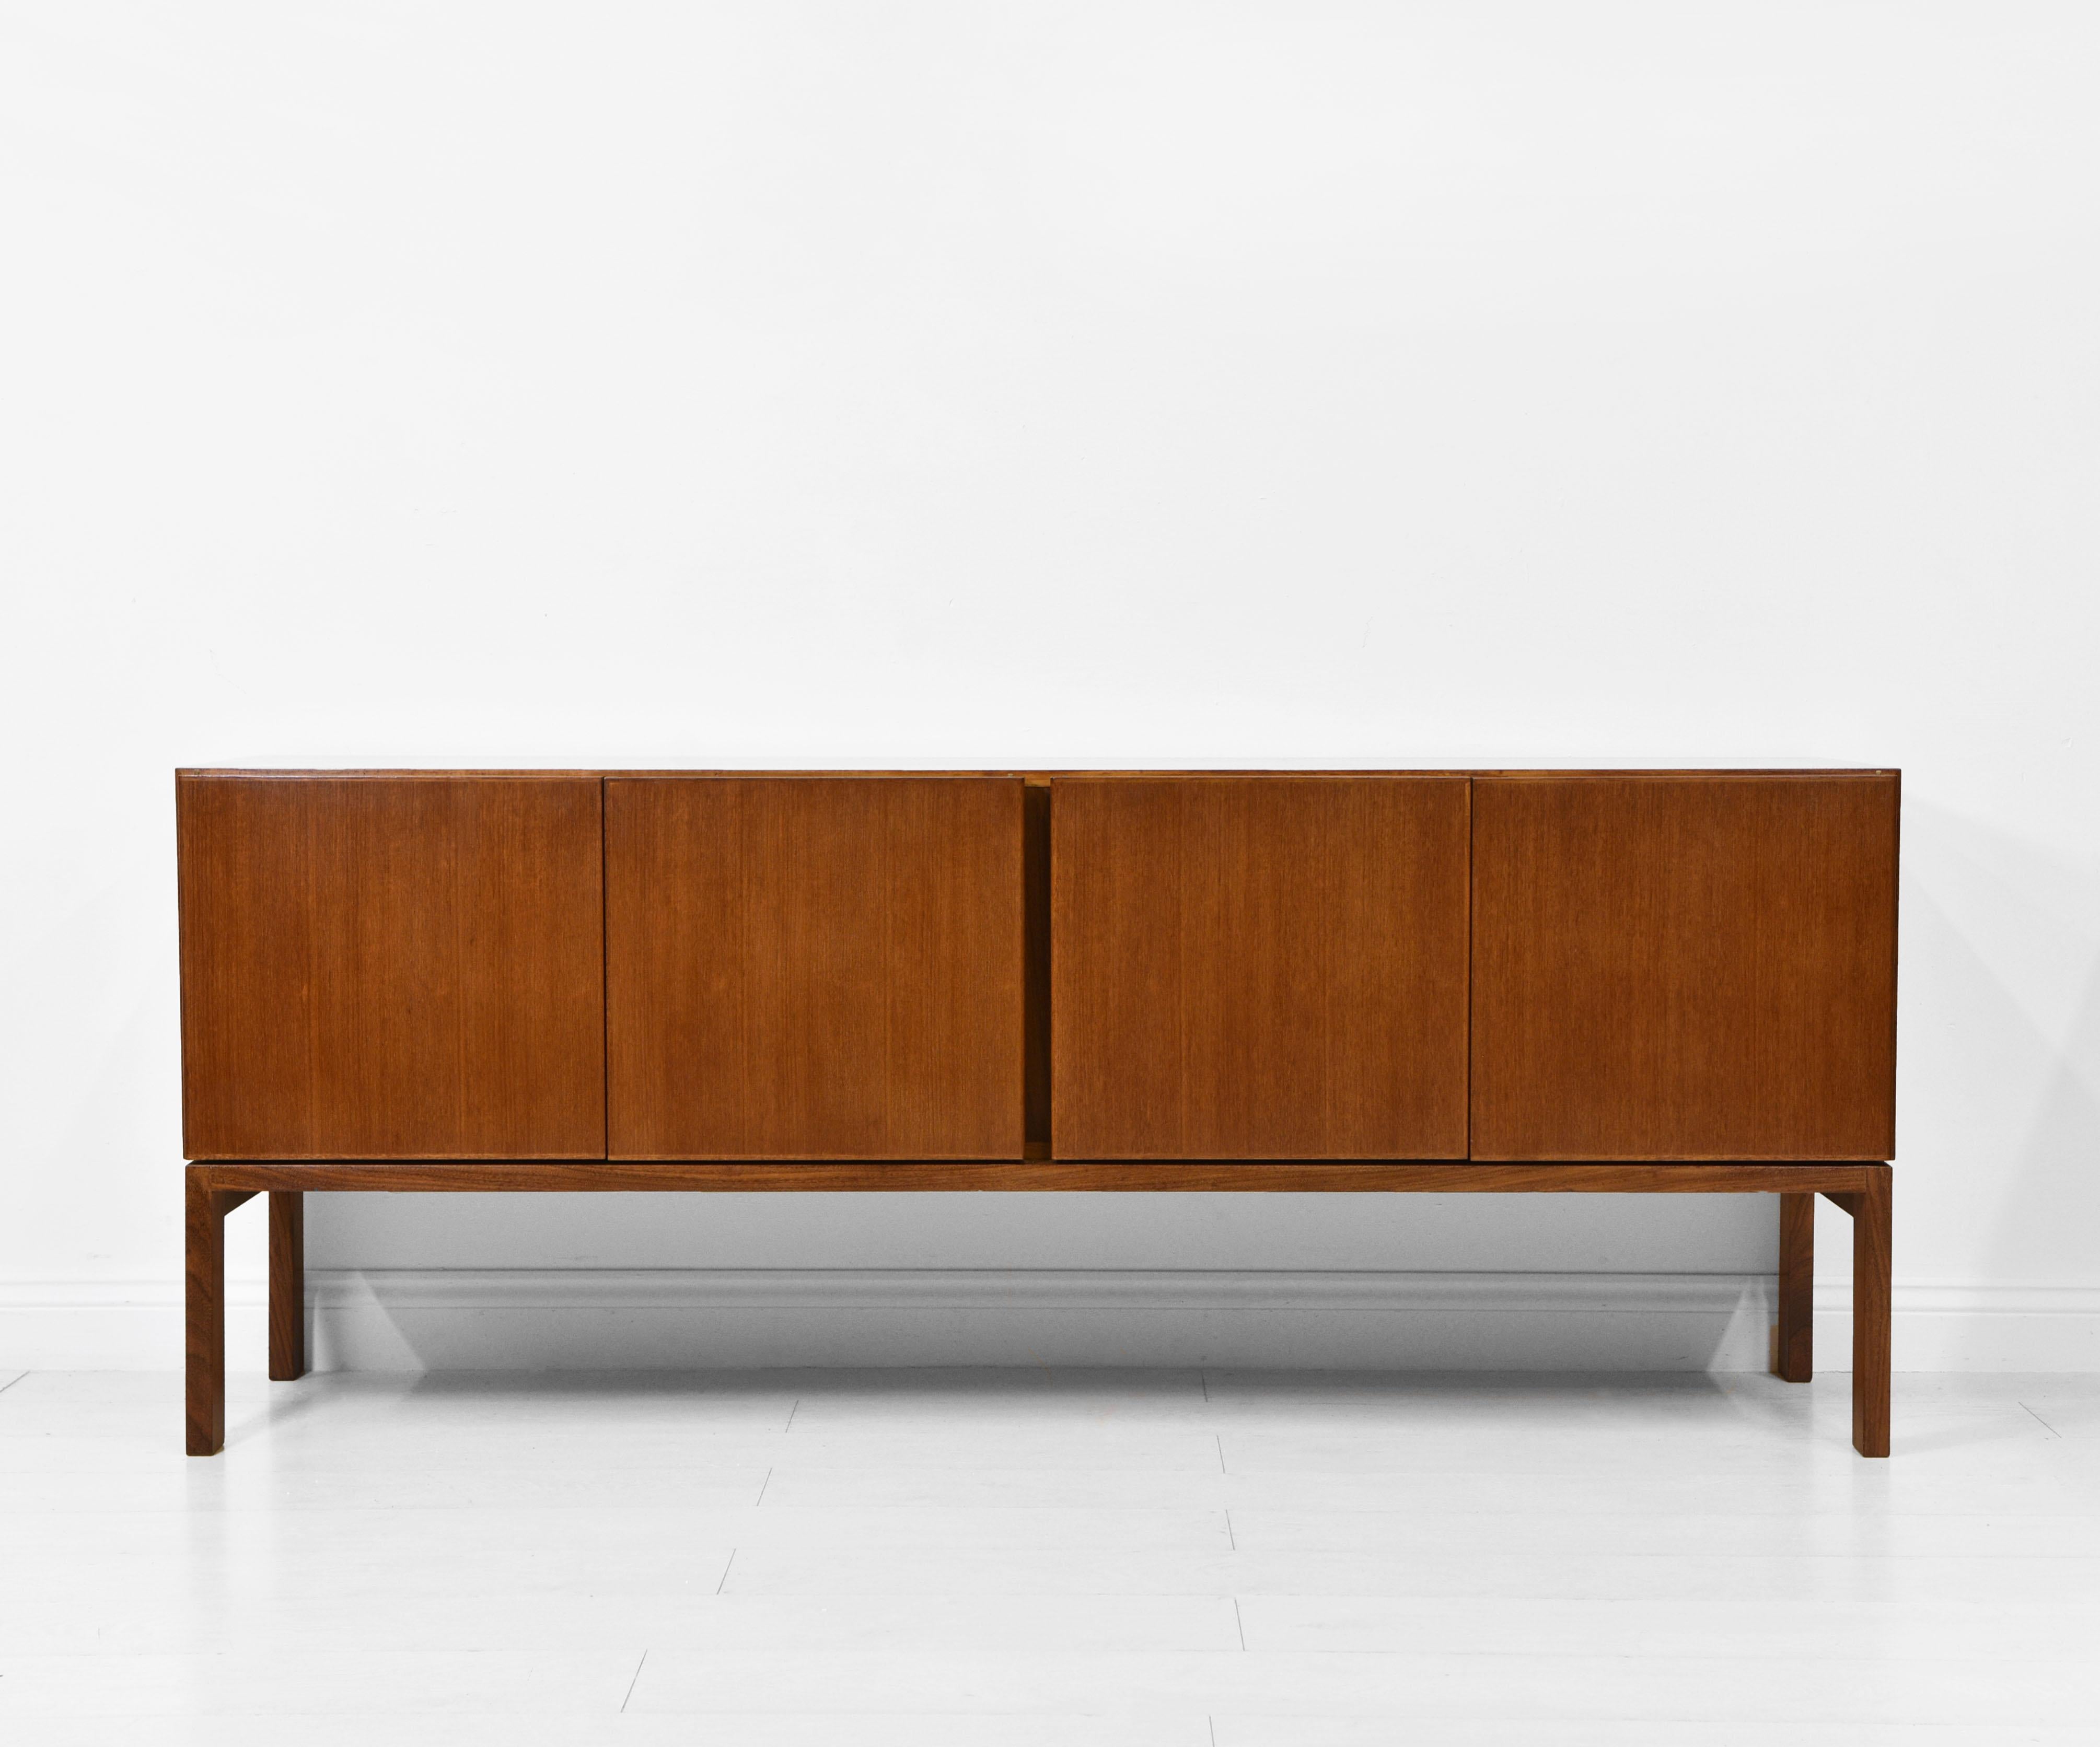 A rare teak Modernist sideboard designed by Robert Heritage for Gordon Russell. GR69 range. Designed in 1969.

This sleek symmetrical design sideboard is in excellent condition and has been cleaned and waxed. Showing some light signs of use.